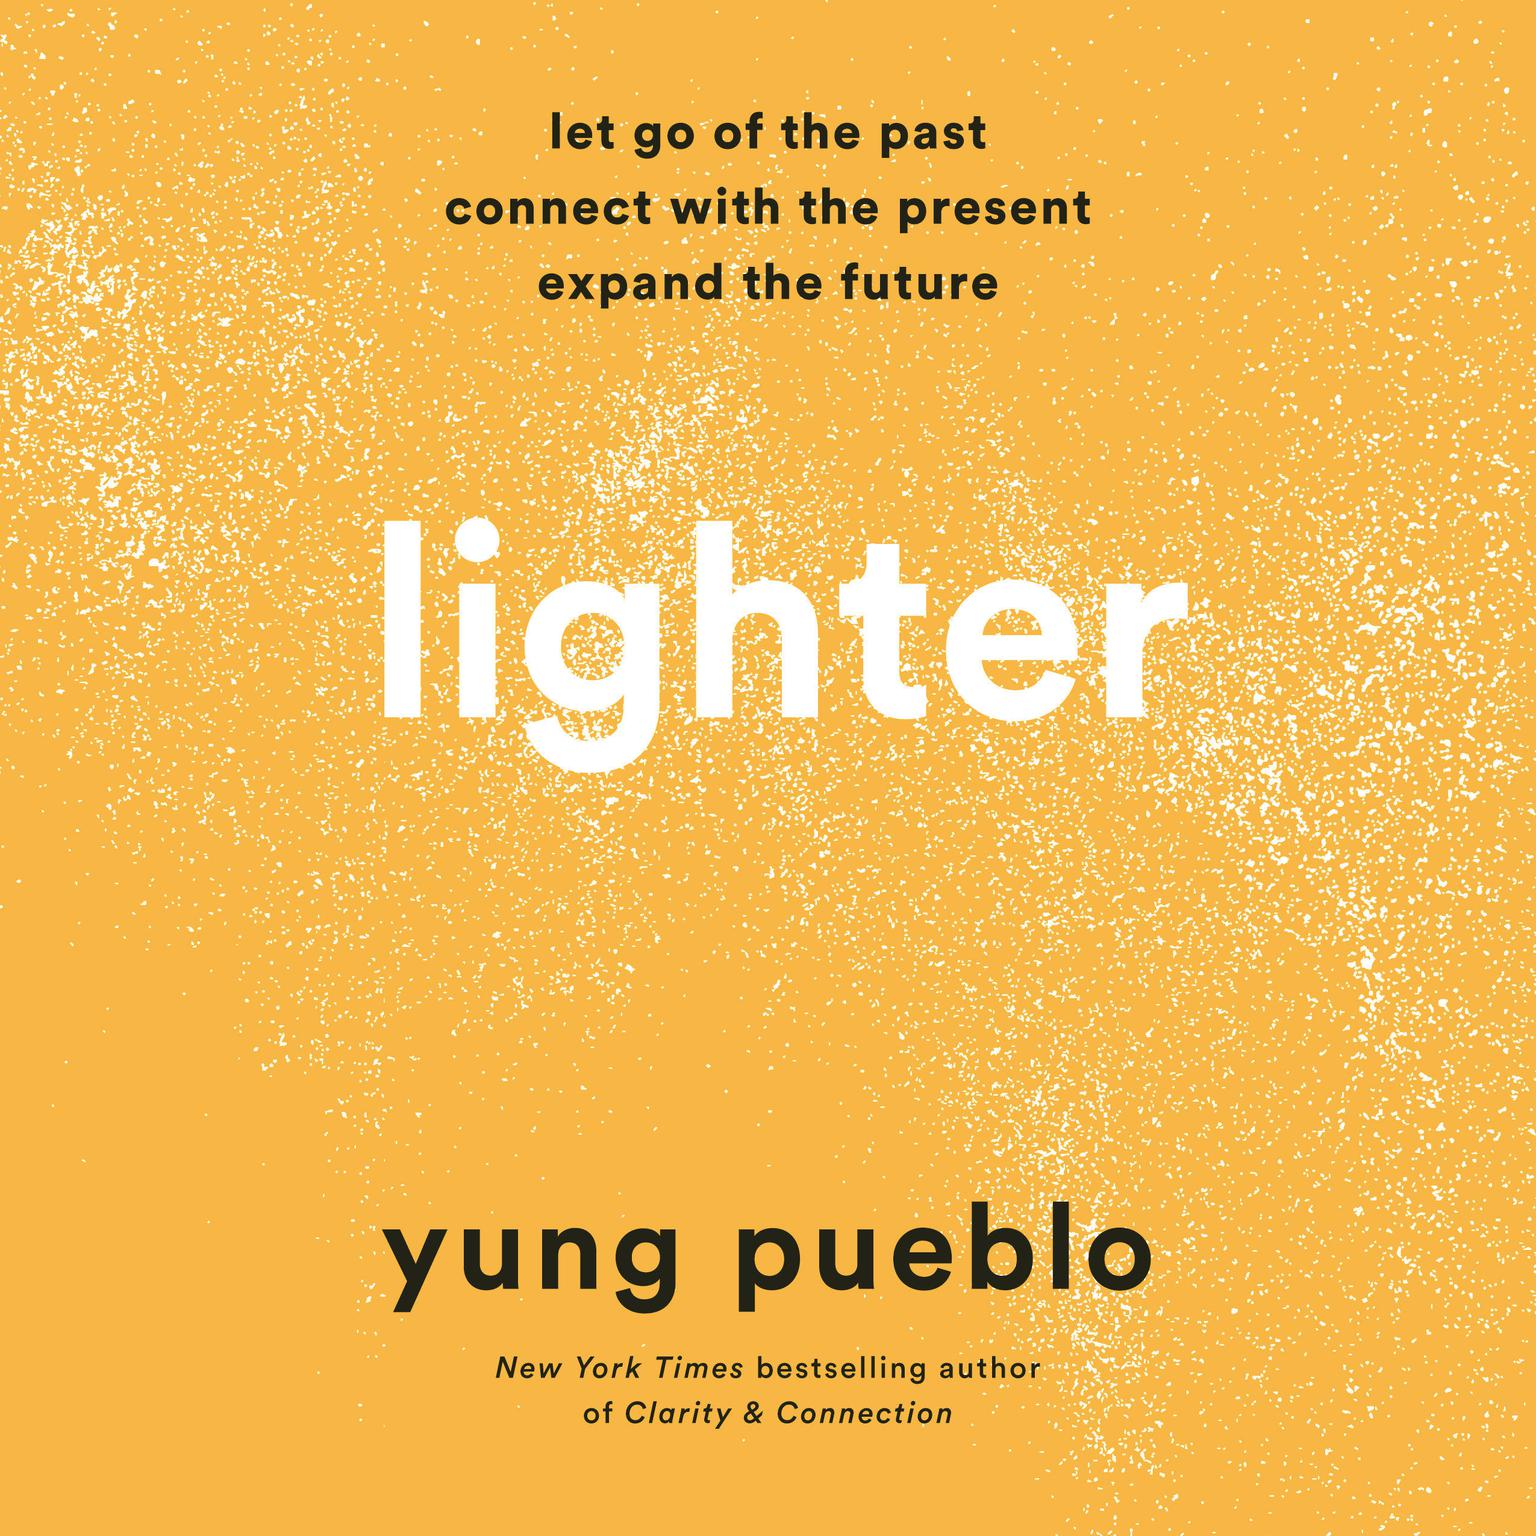 Lighter: Let Go of the Past, Connect with the Present, and Expand the Future Audiobook, by Yung Pueblo